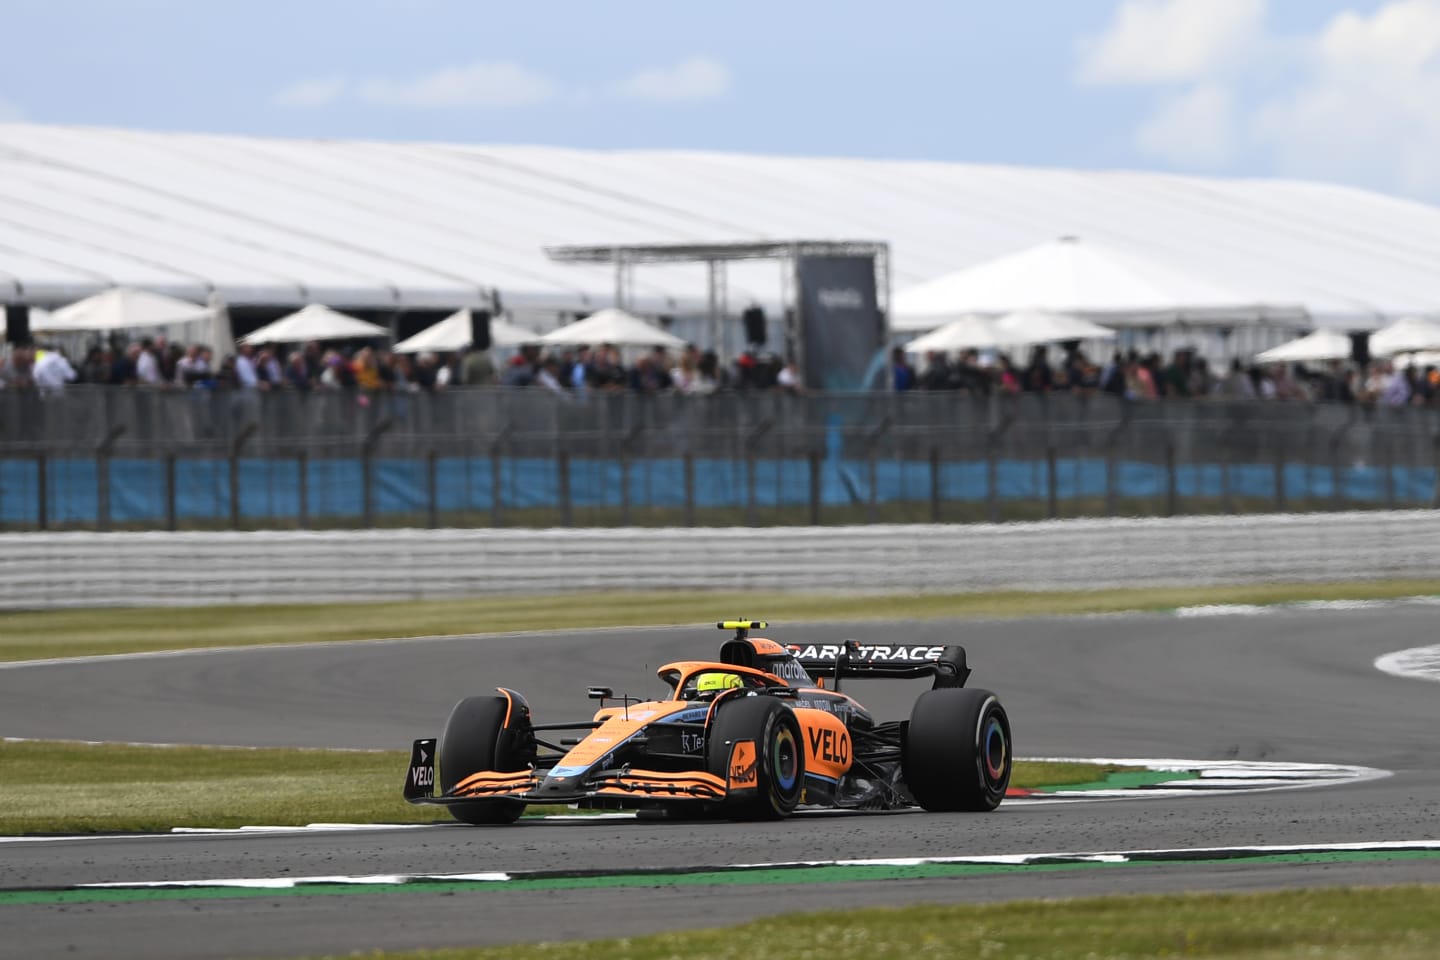 NORTHAMPTON, ENGLAND - JULY 01: Lando Norris of Great Britain driving the (4) McLaren MCL36 Mercedes on track during practice ahead of the F1 Grand Prix of Great Britain at Silverstone on July 01, 2022 in Northampton, England. (Photo by Rudy Carezzevoli - Formula 1/Formula 1 via Getty Images)